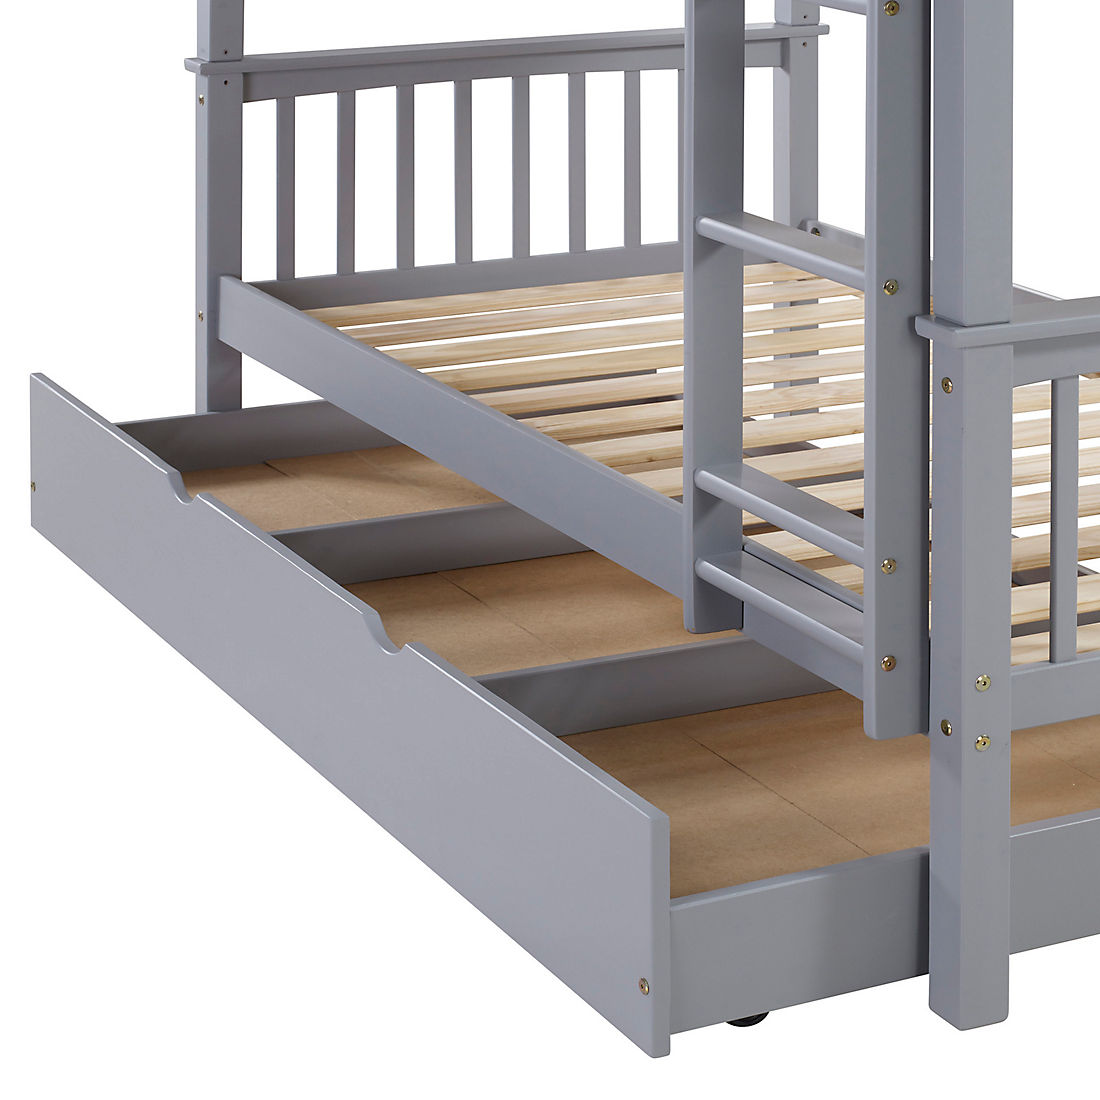 W Trends Twin Size Solid Wood Bunk Bed, Bjs Bunk Bed With Trundle Instructions